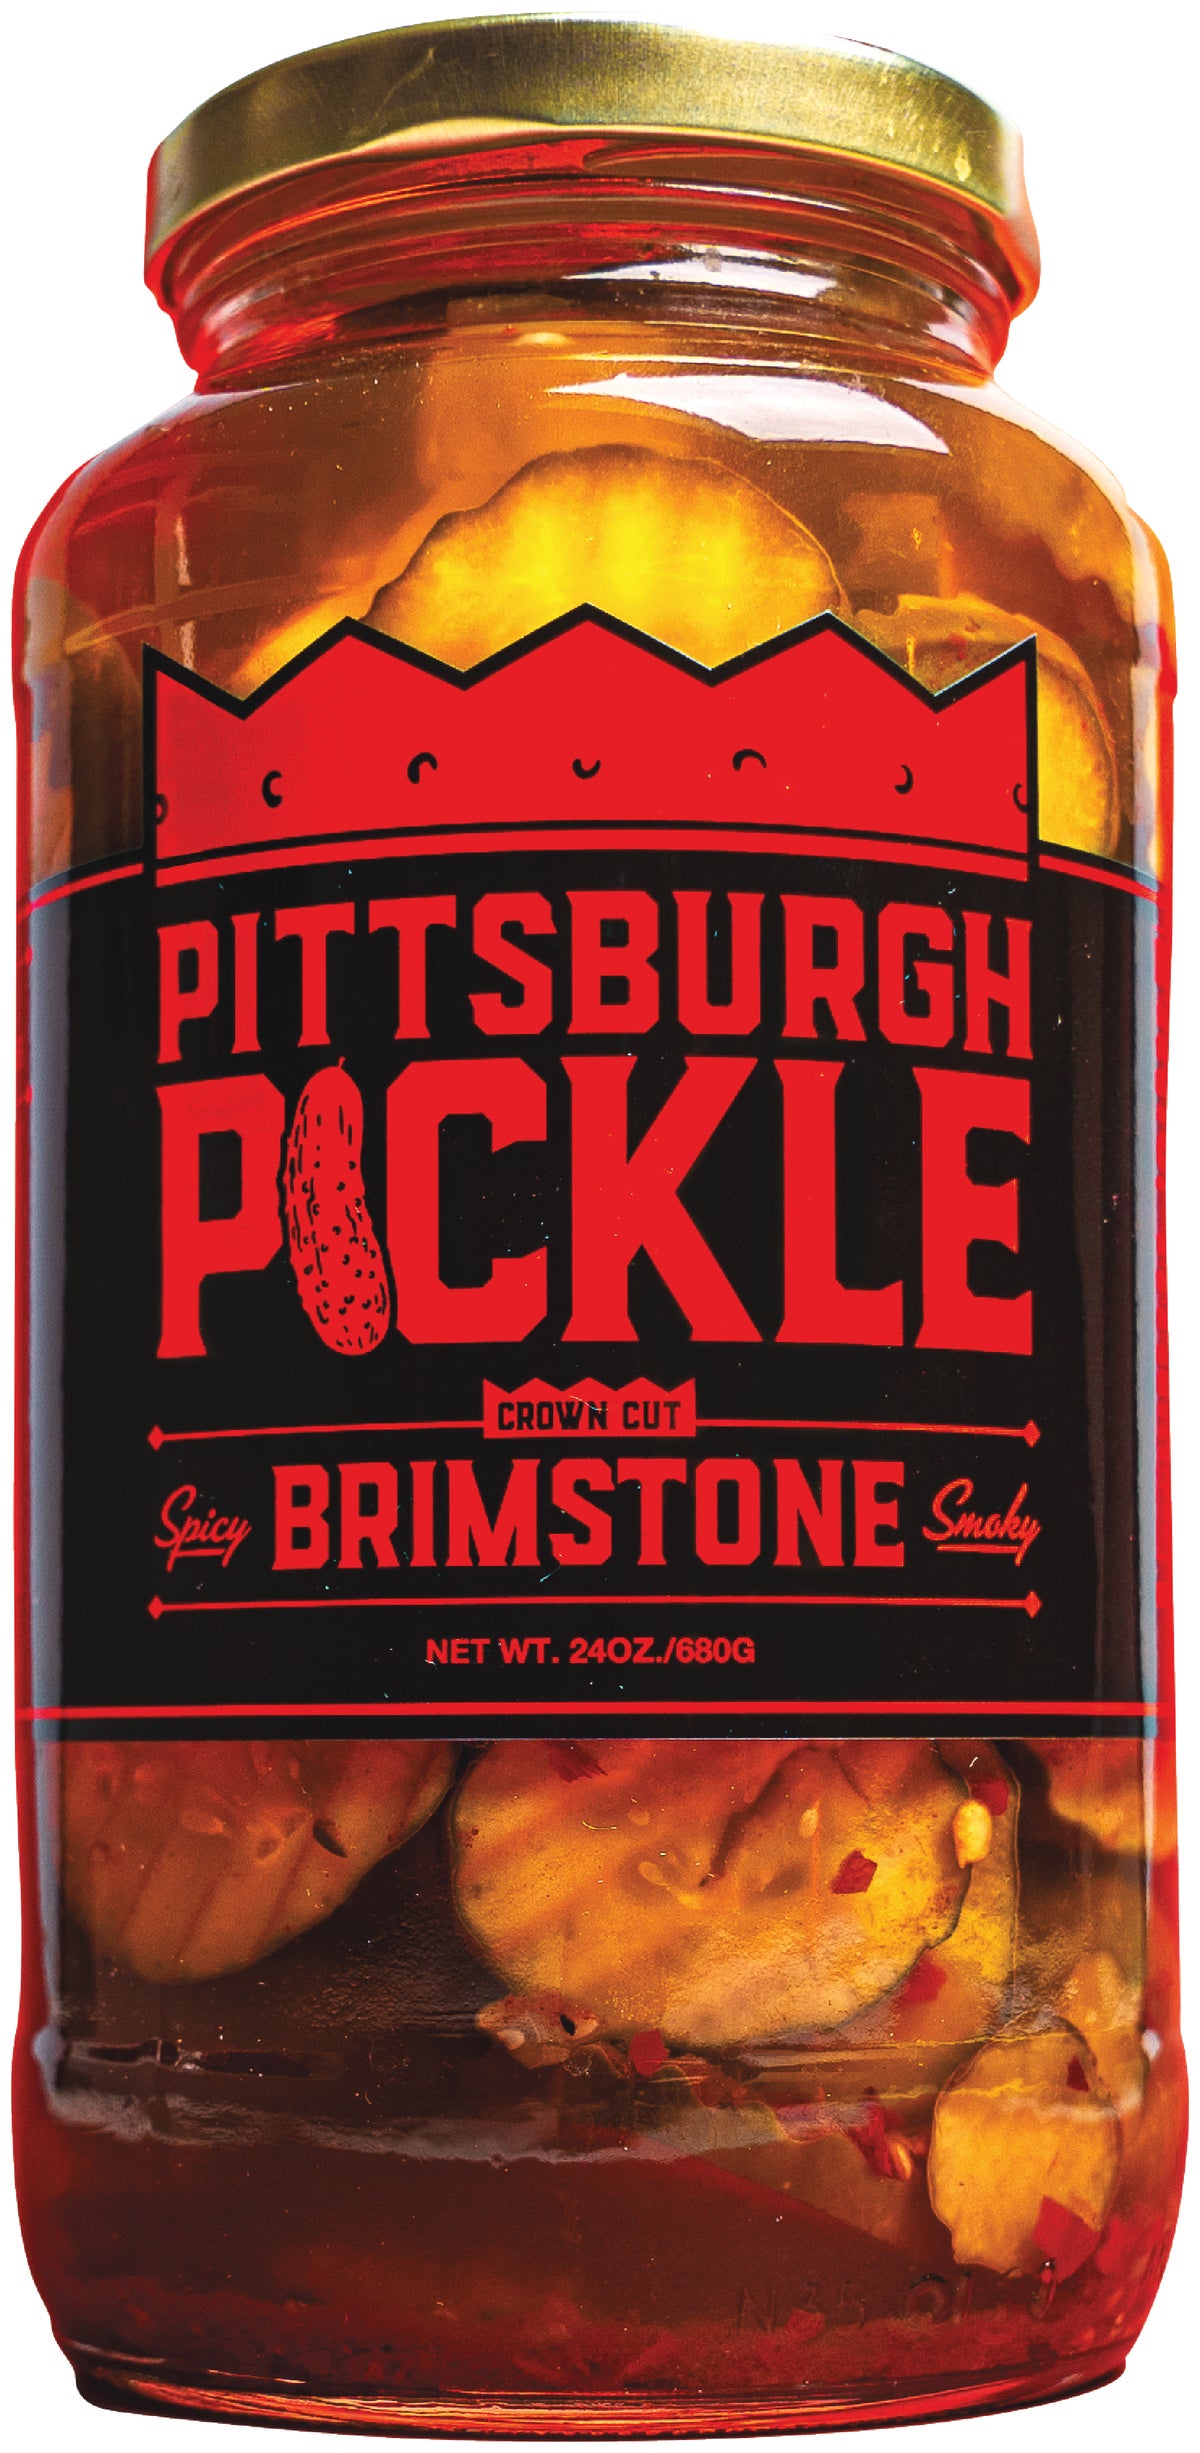 Buy Pittsburgh Pickle Company Brimstone Pickles 24 Oz. (Pack of 6)